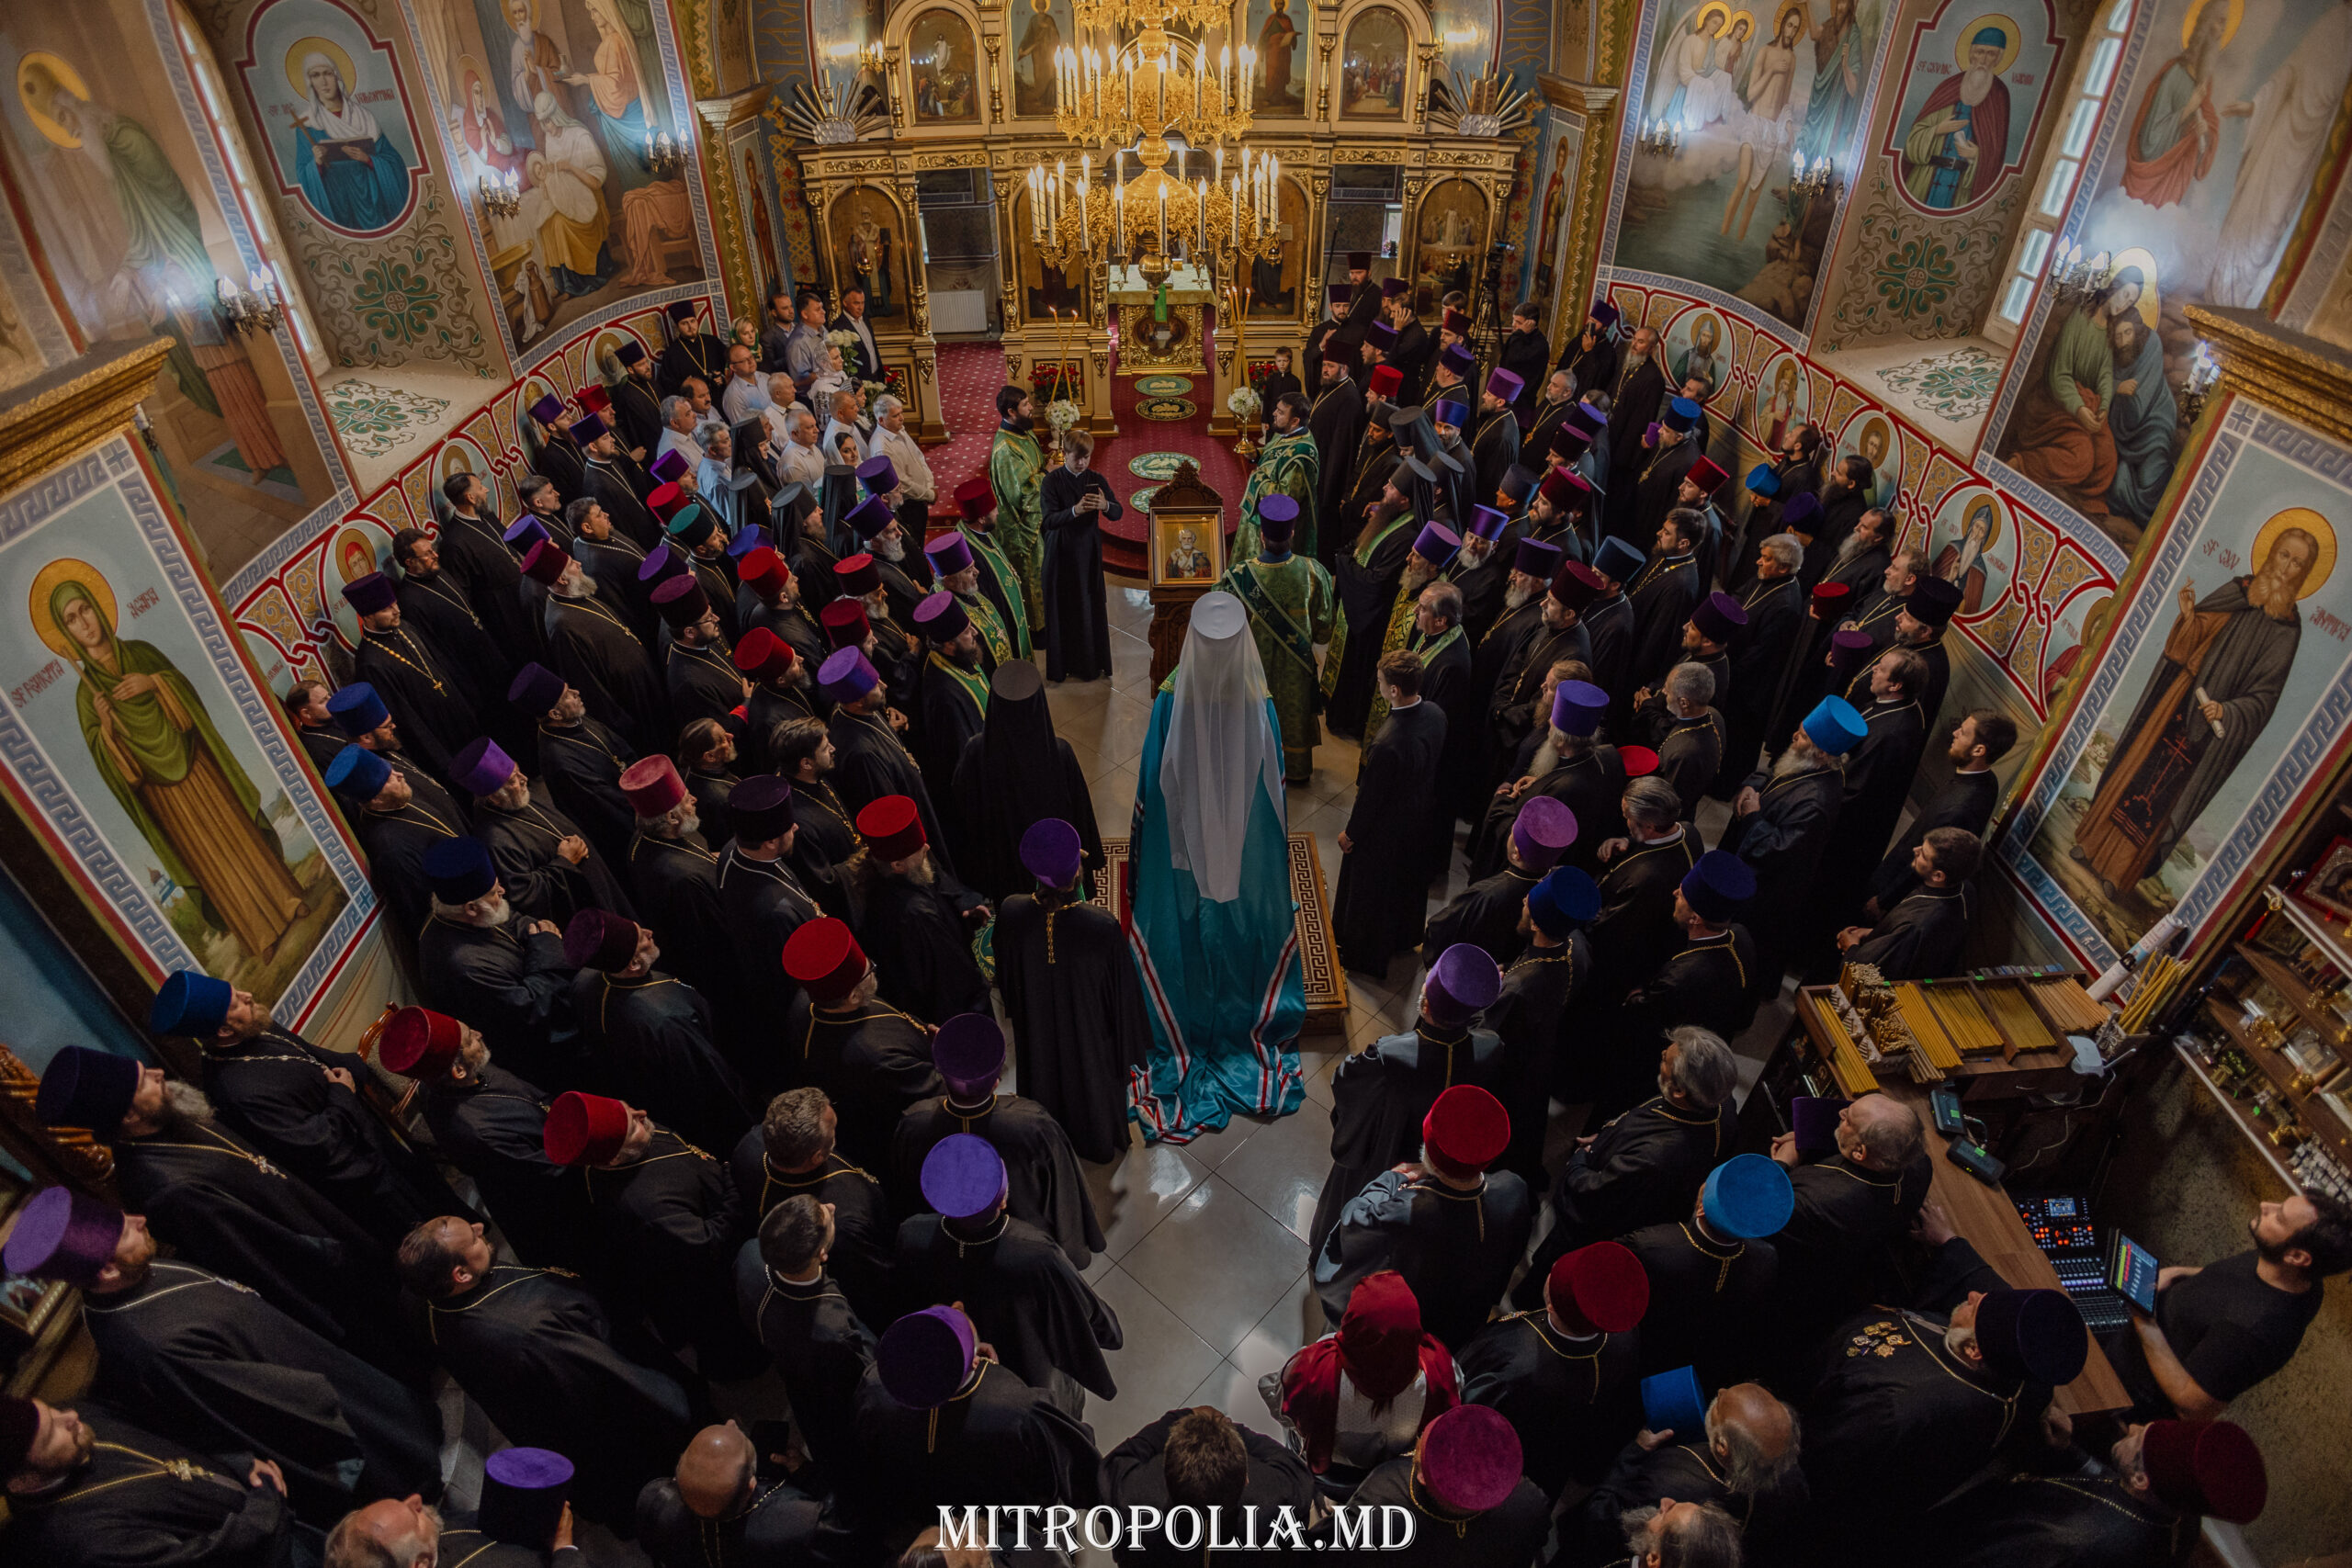 New Diocese Established in Moldova: Orthodox Church of Moldova Welcomes Diocese of Soroca and Drochia